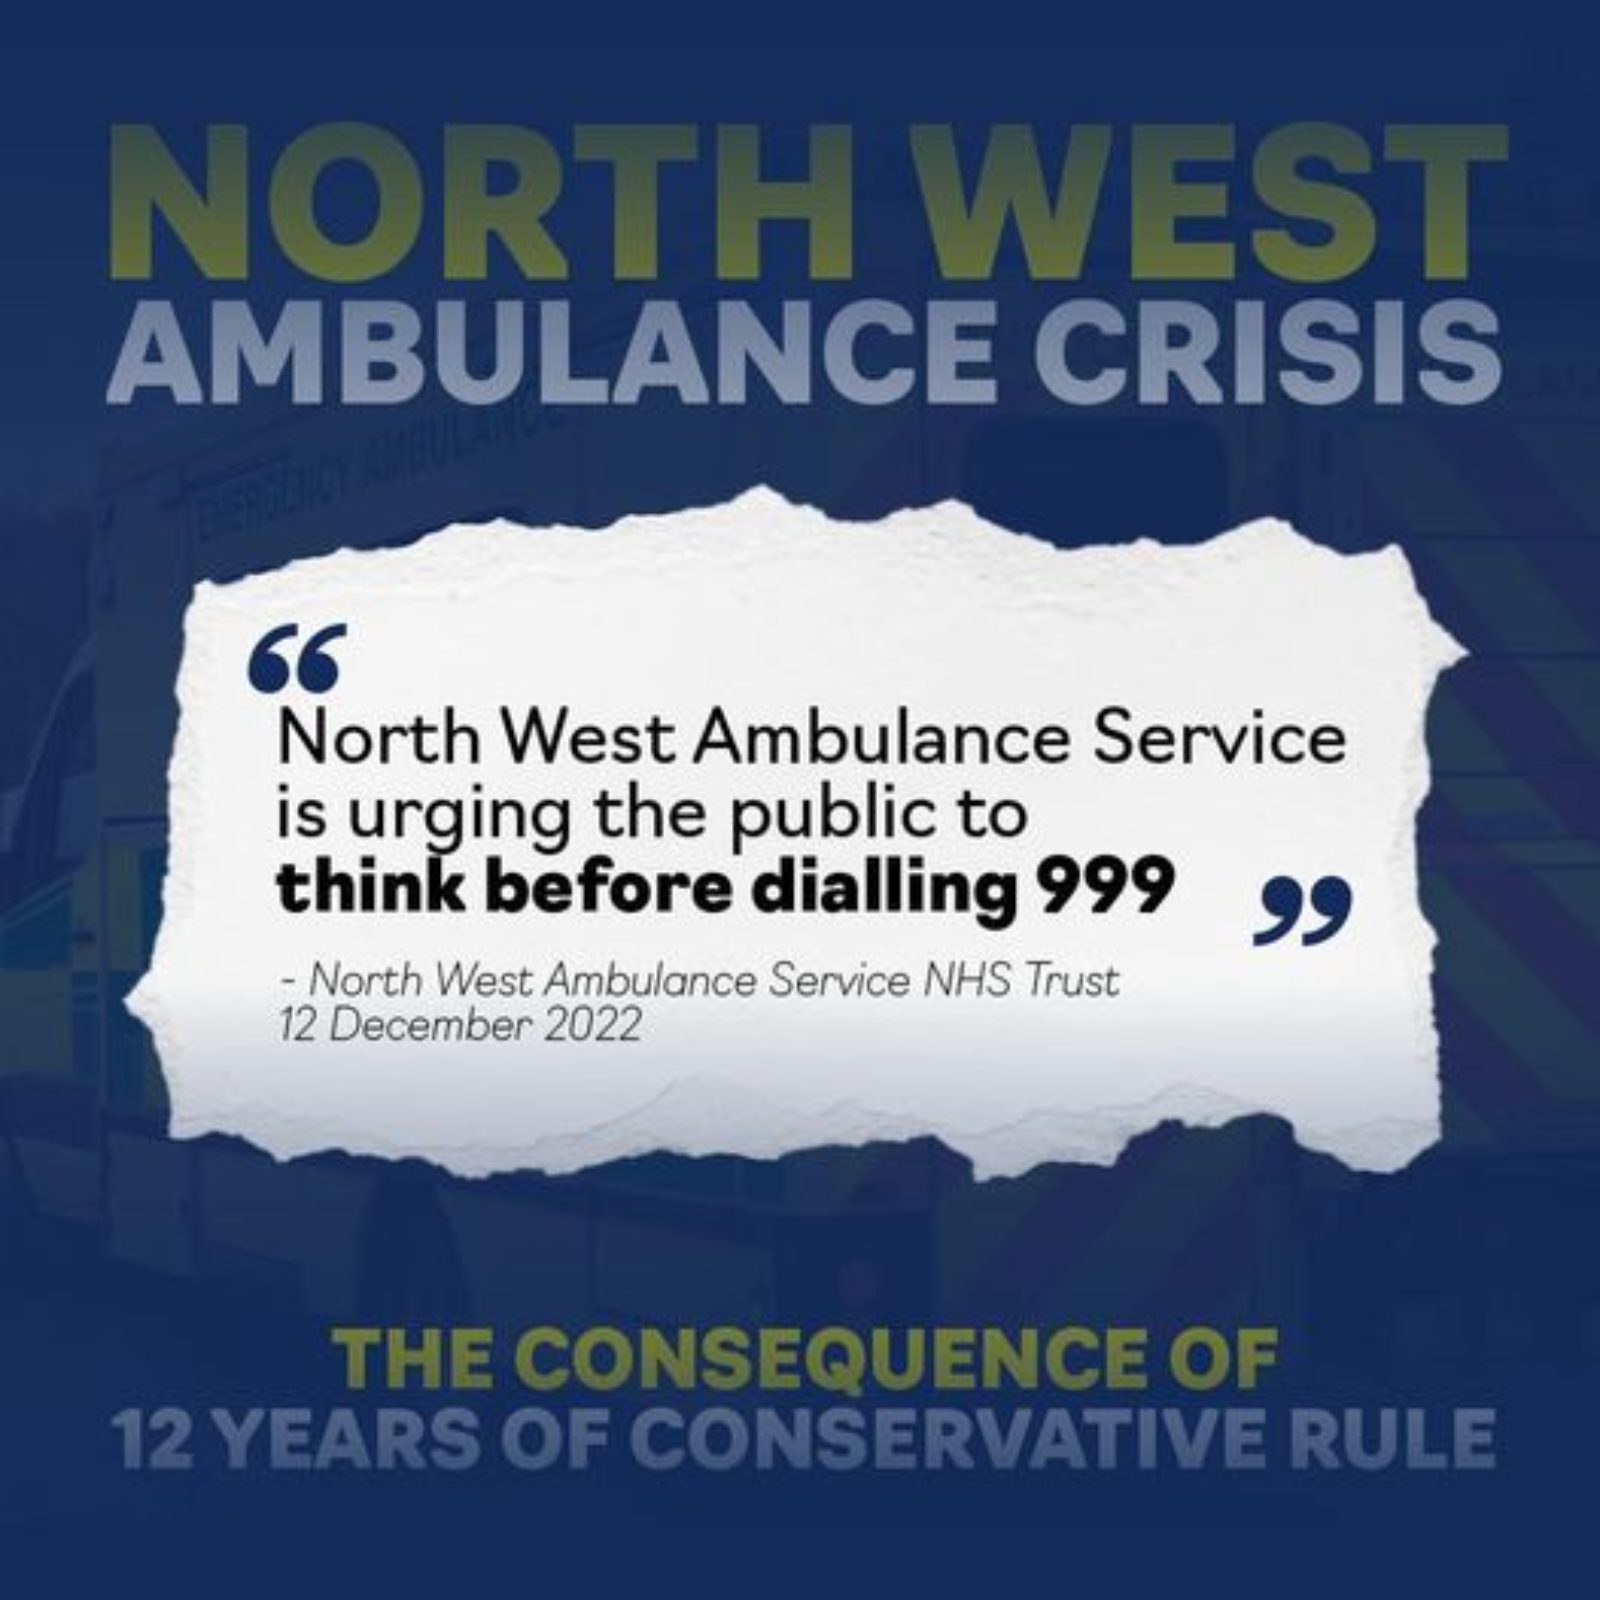 The North West Ambulance Service is in crisis.